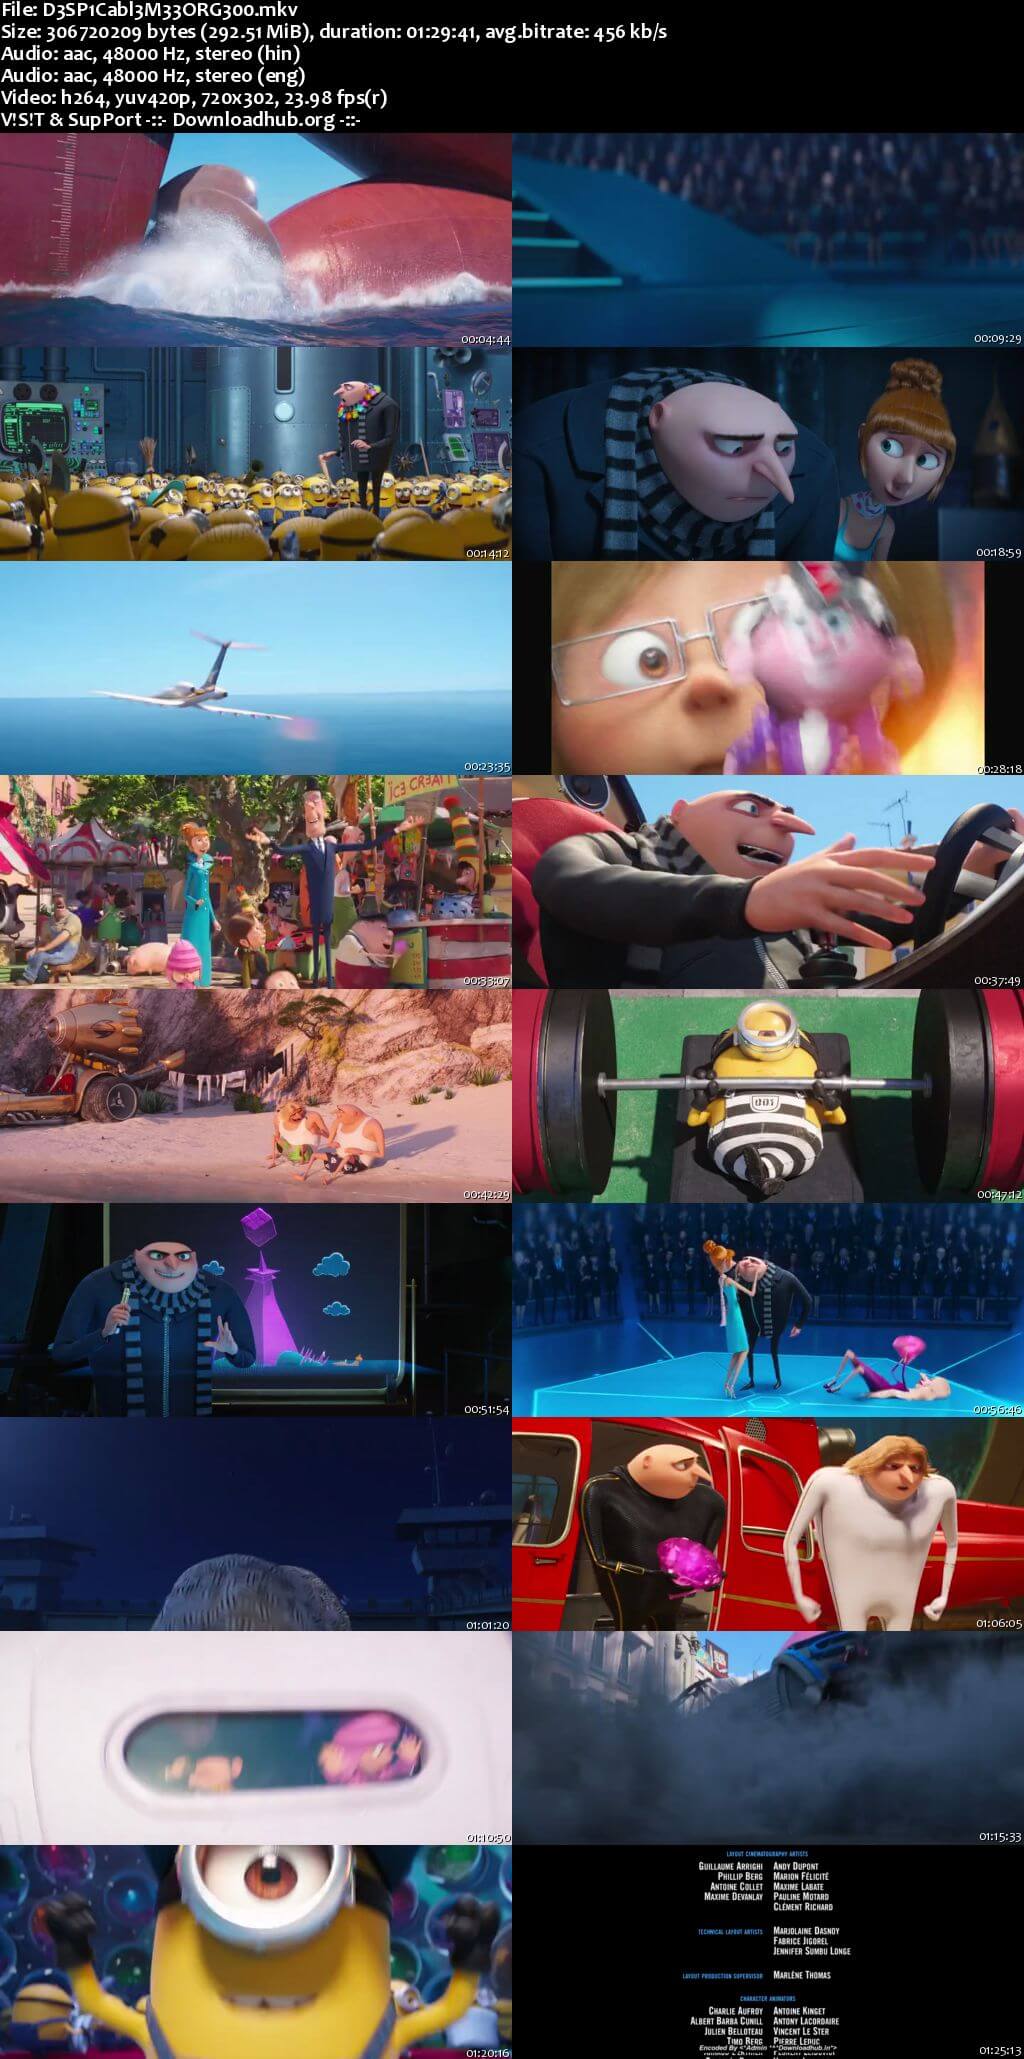 despicable me 3 full movie free download mp4